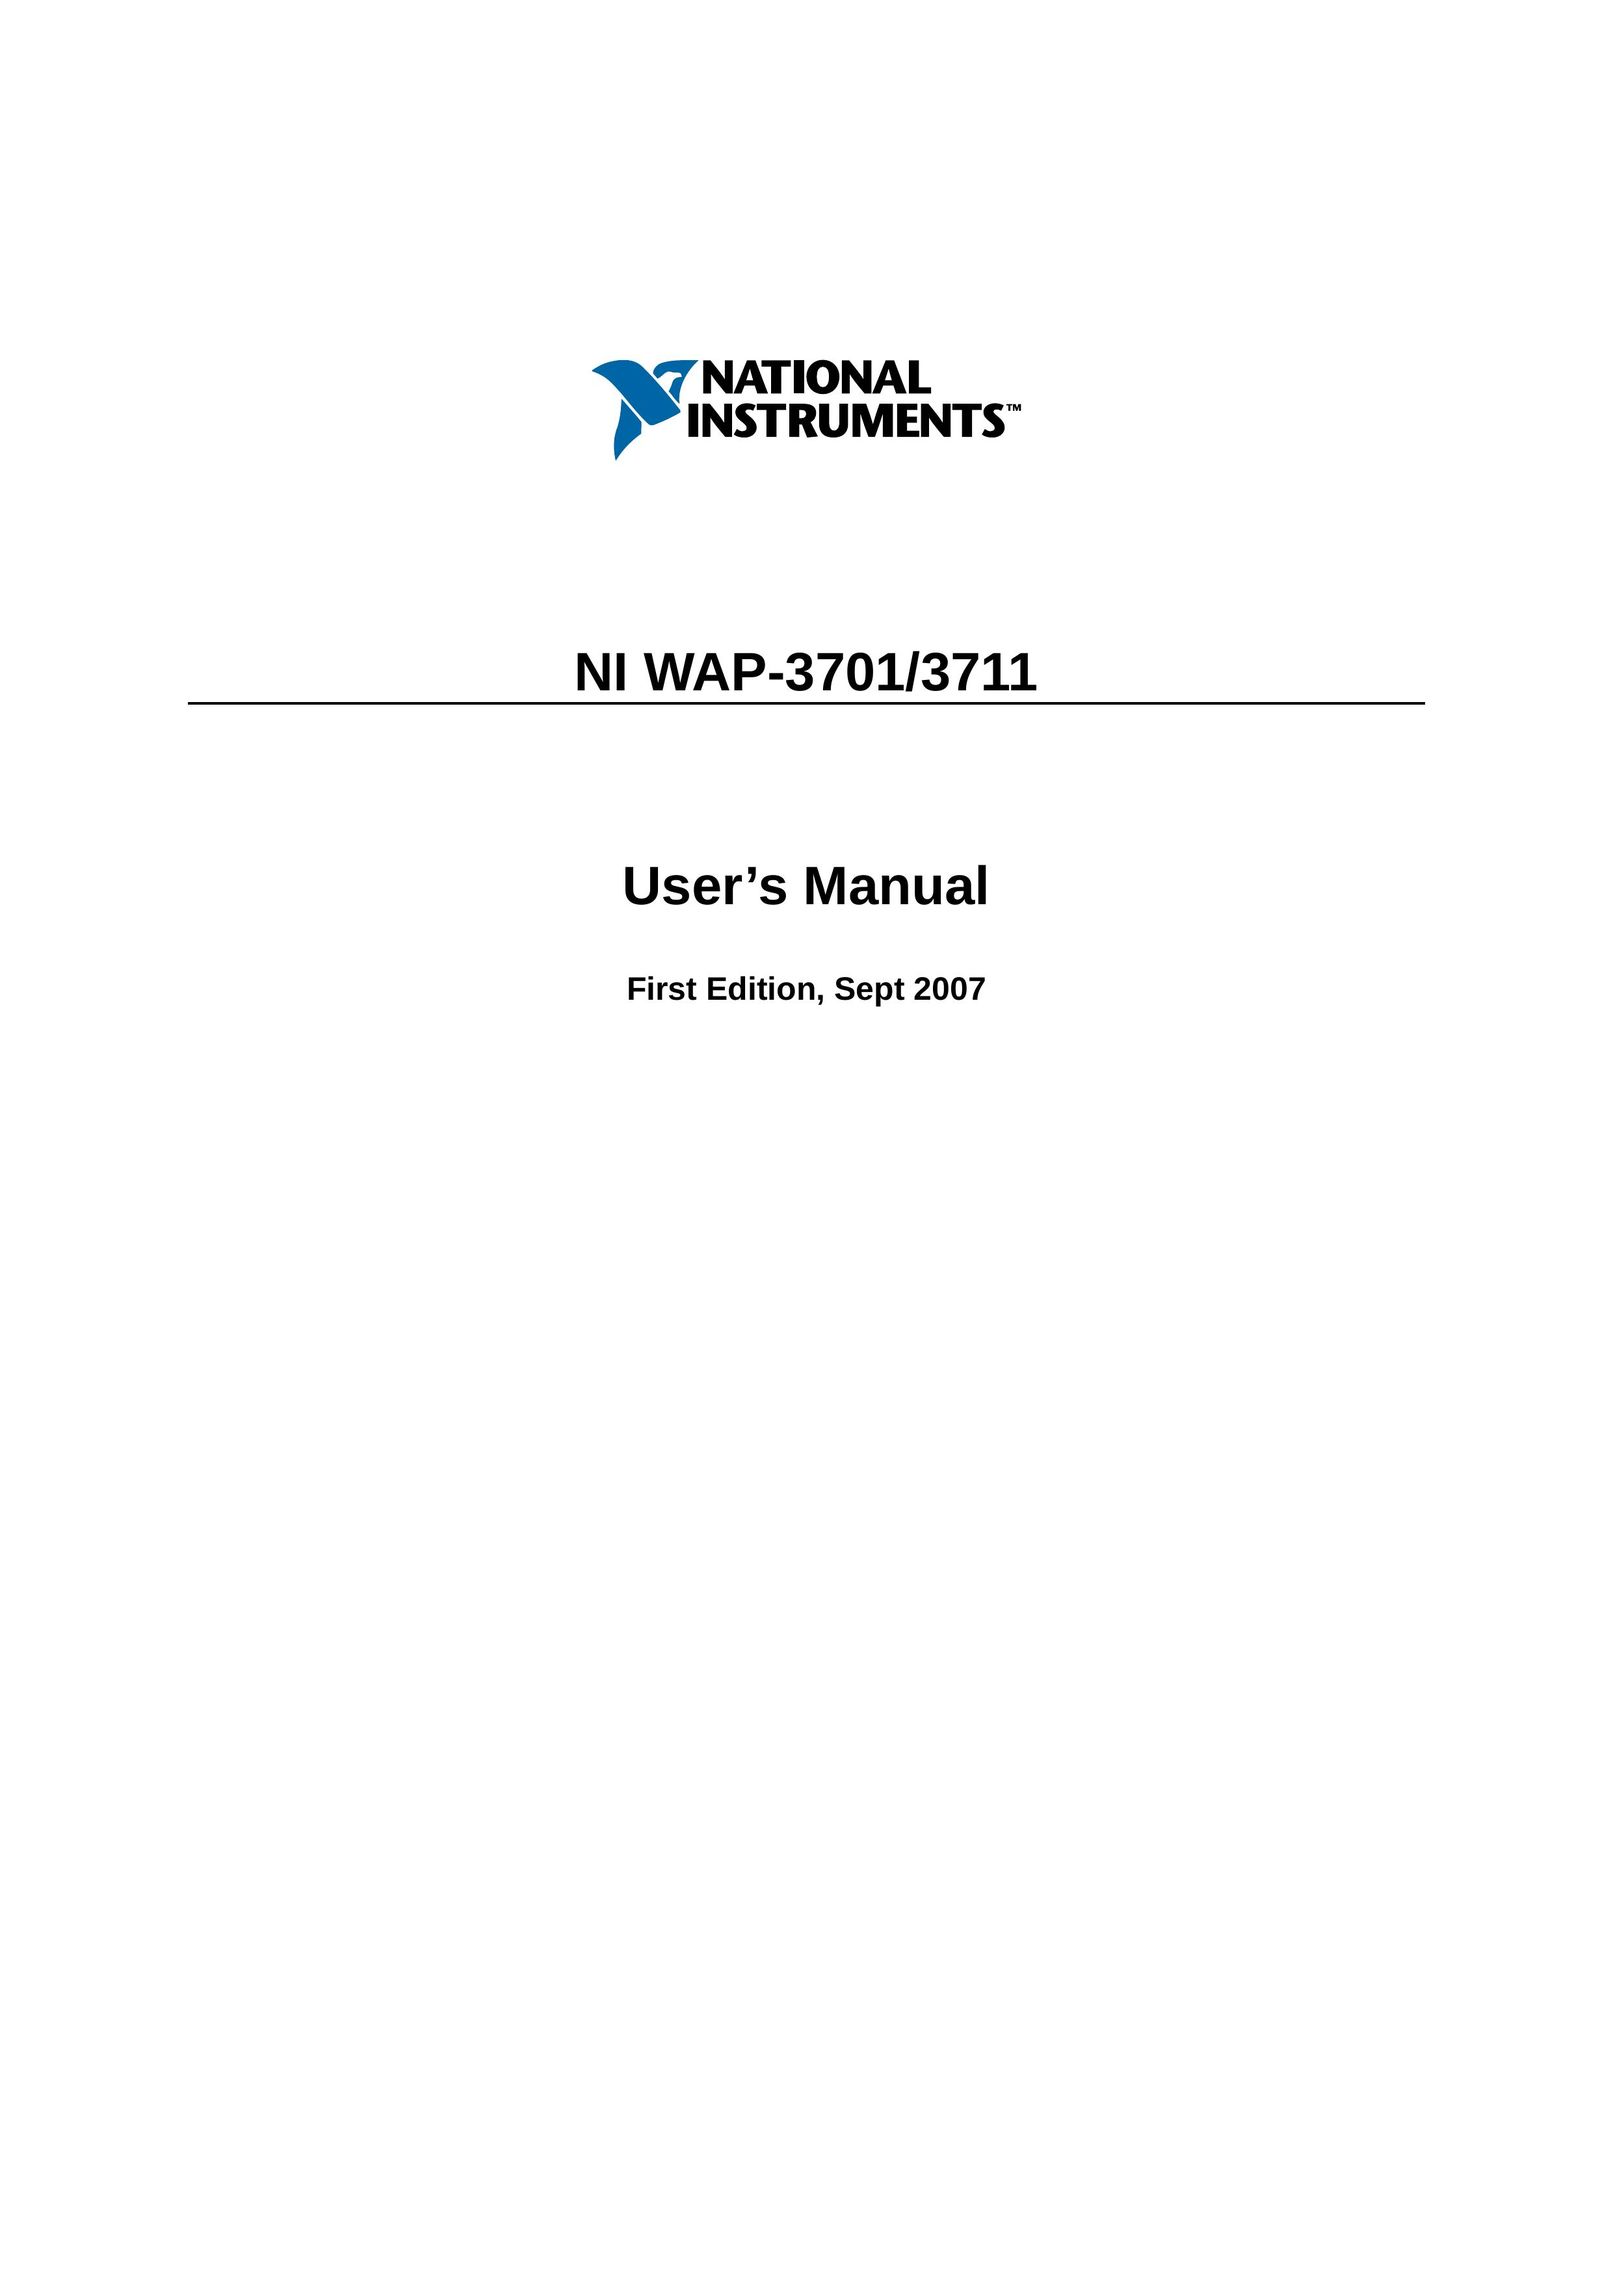 National Instruments WAP-3711 Network Router User Manual